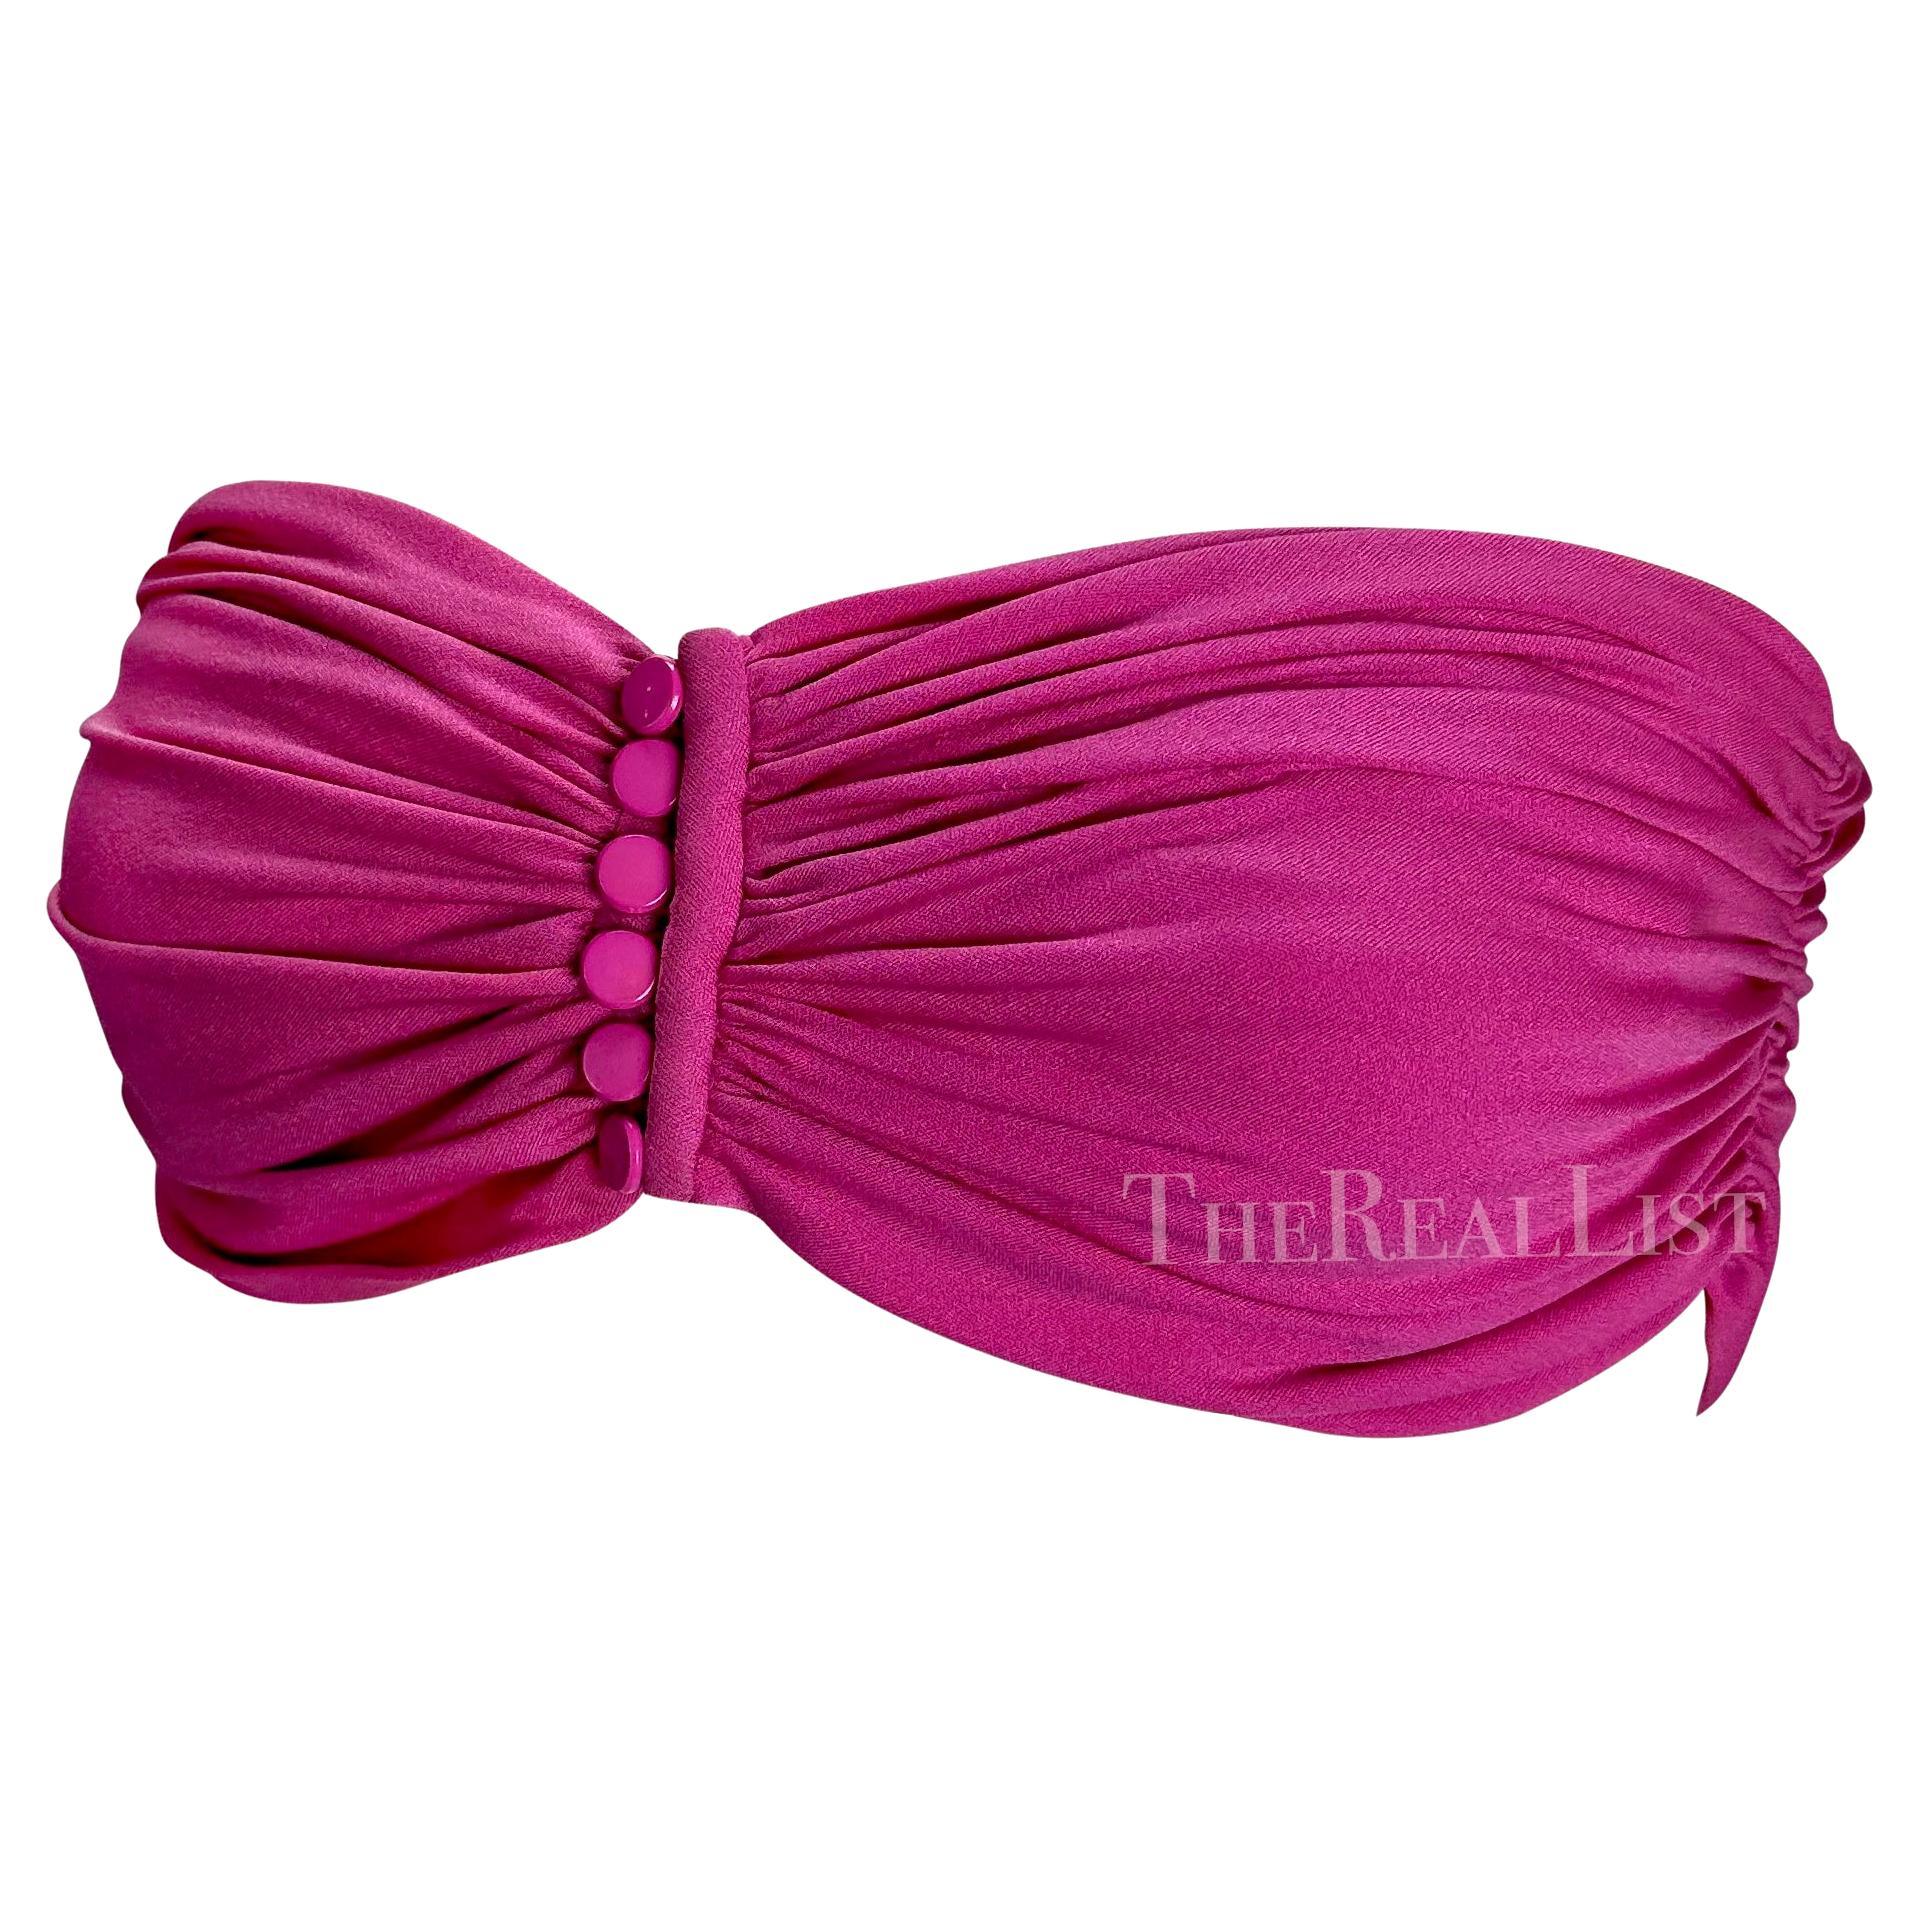 Presenting a fabulous hot pink Valentino Night bandeau top. From the 1980s, this beautiful ruched crop top features a button-down closure between the breasts. This ultra-sexy top is the perfect timeless vintage addition to any modern wardrobe!